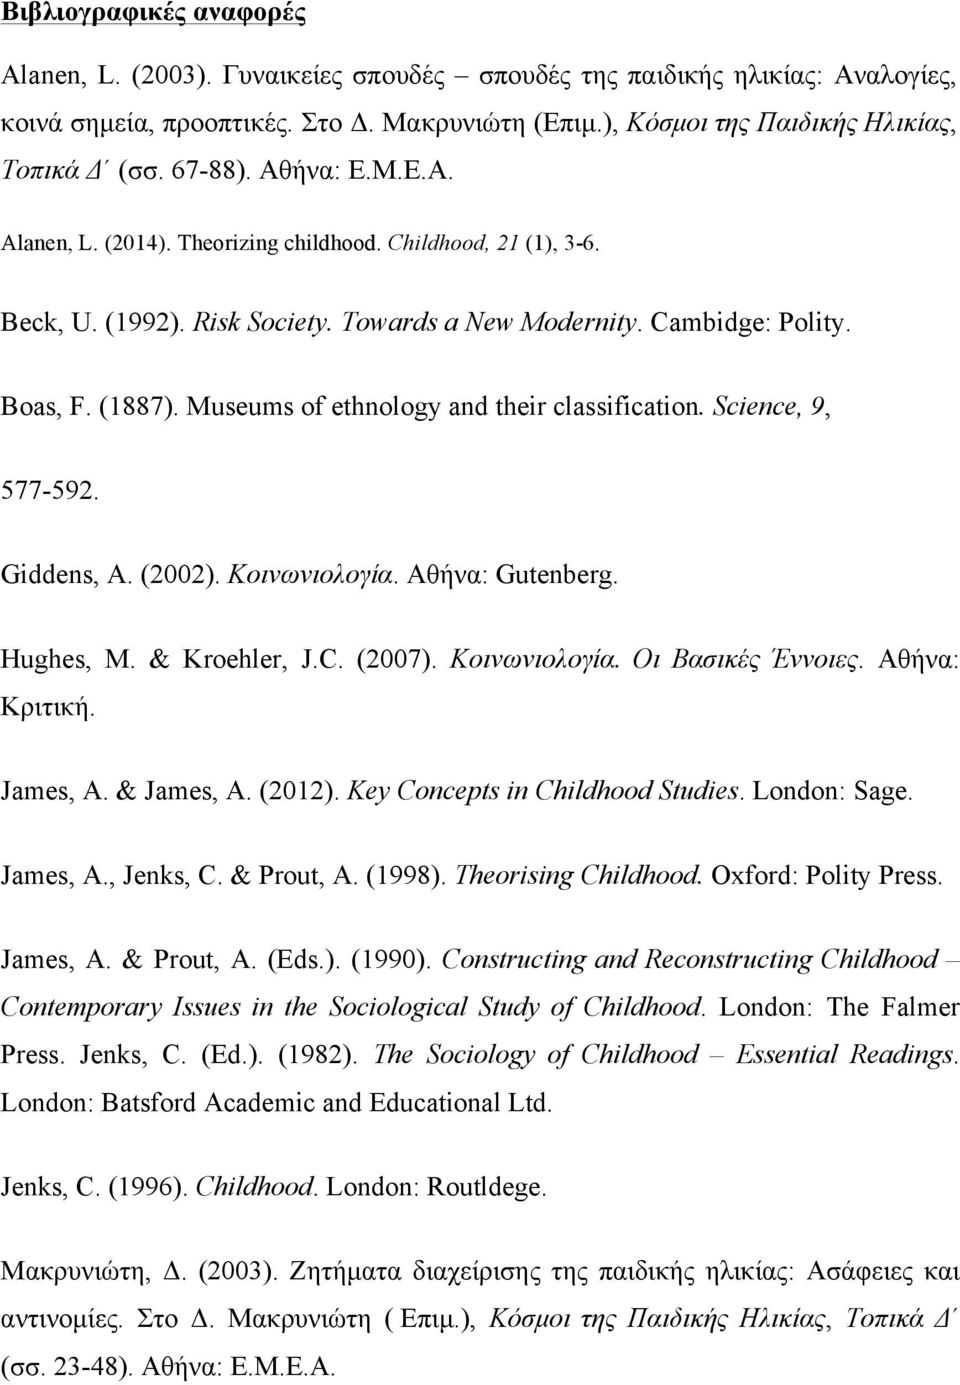 Museums of ethnology and their classification. Science, 9, 577-592. Giddens, A. (2002). Κοινωνιολογία. Αθήνα: Gutenberg. Hughes, M. & Kroehler, J.C. (2007). Κοινωνιολογία. Οι Βασικές Έννοιες.